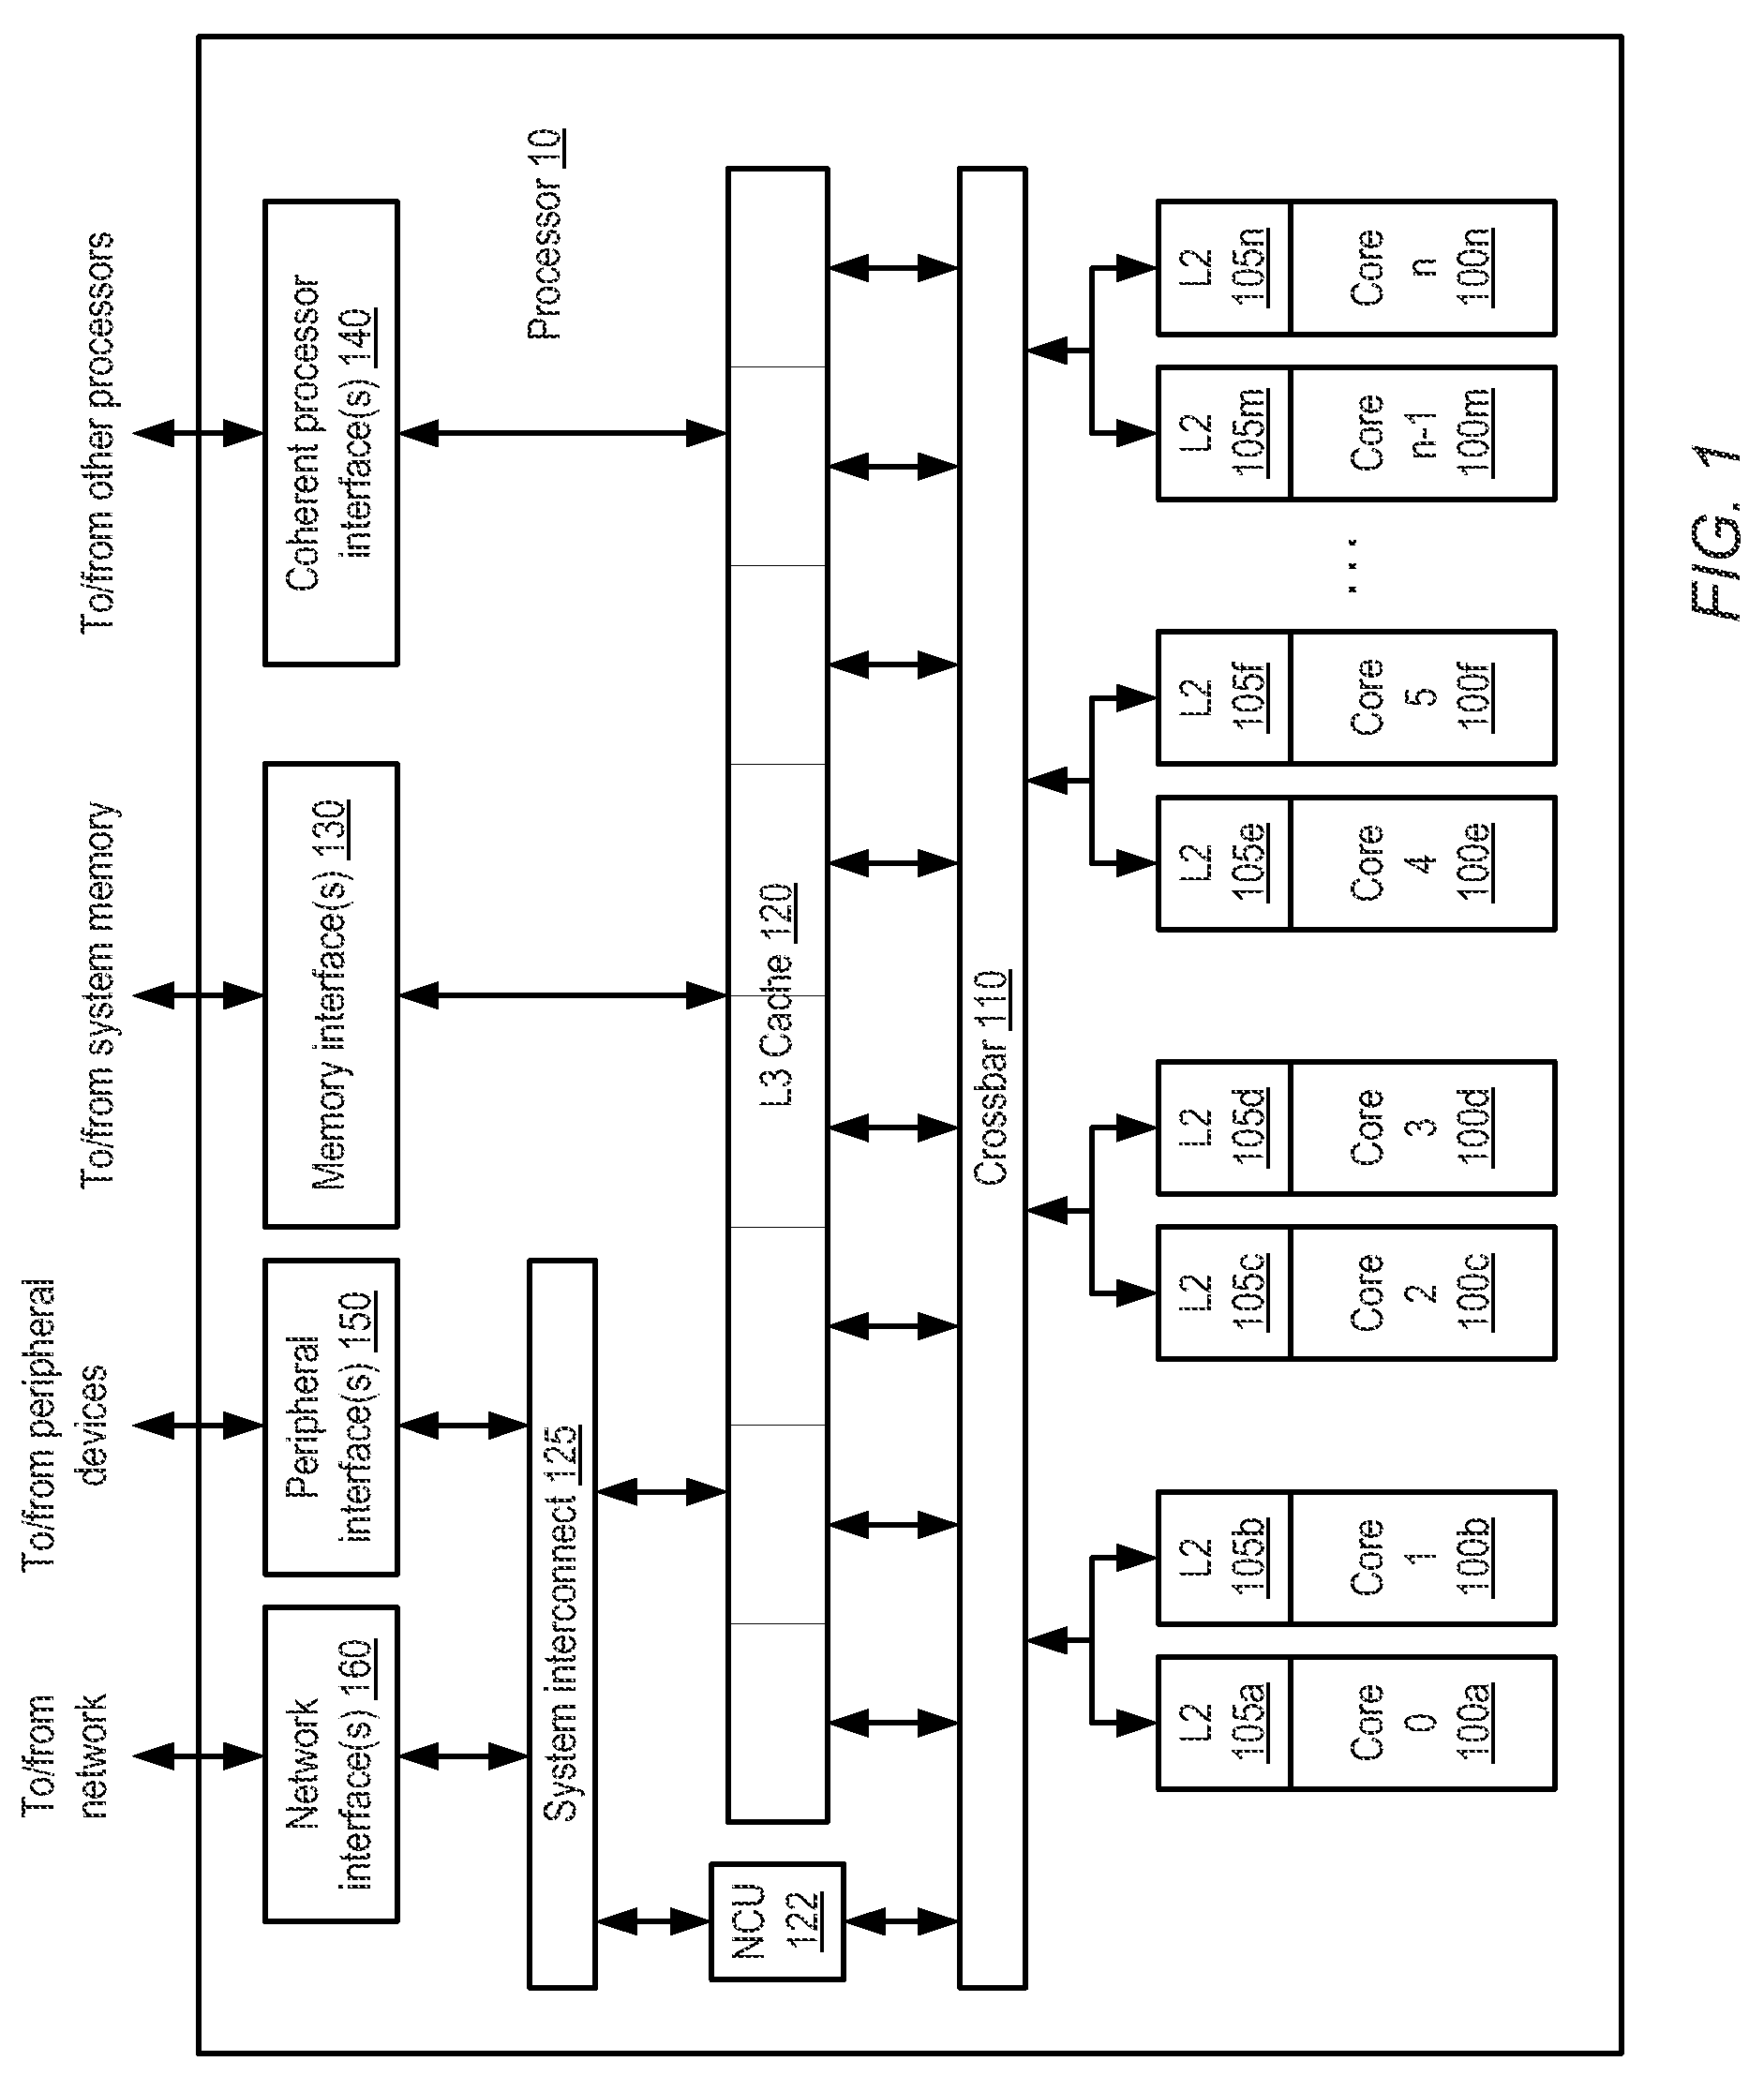 Multiported register file for multithreaded processors and processors employing register windows